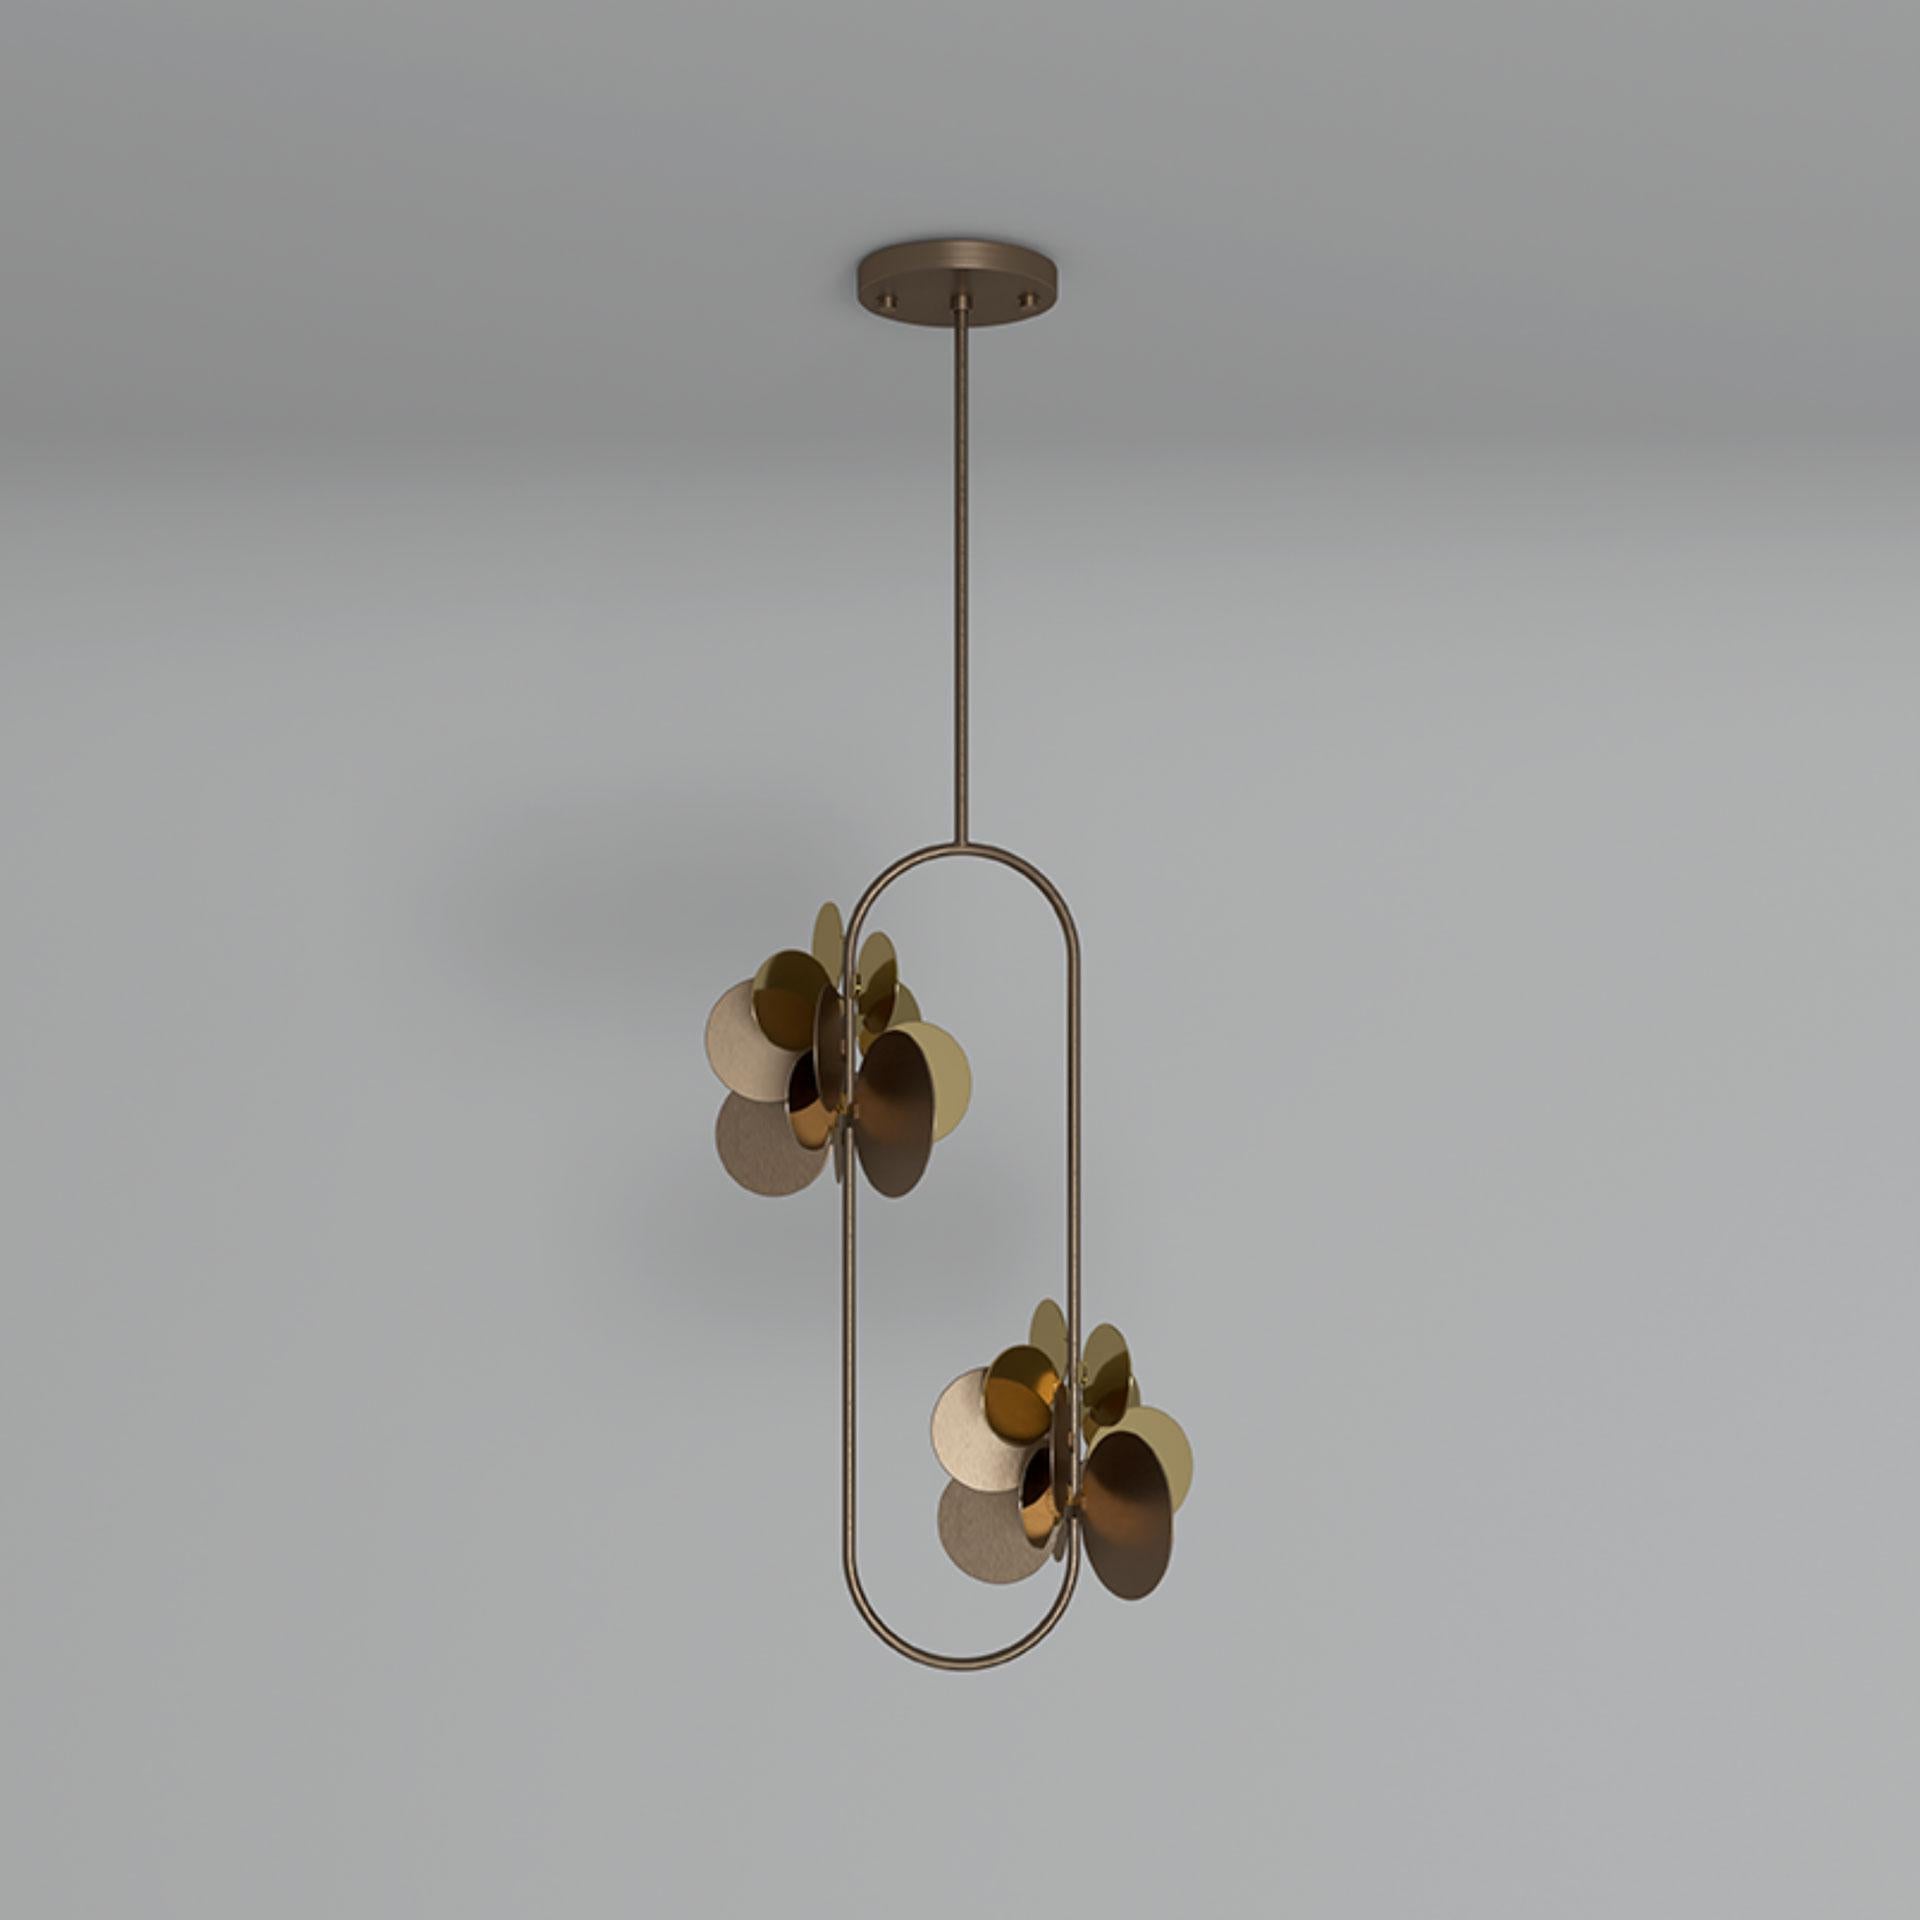 Portuguese 21st Century Hera Pendant Lamp Brass by Creativemary For Sale